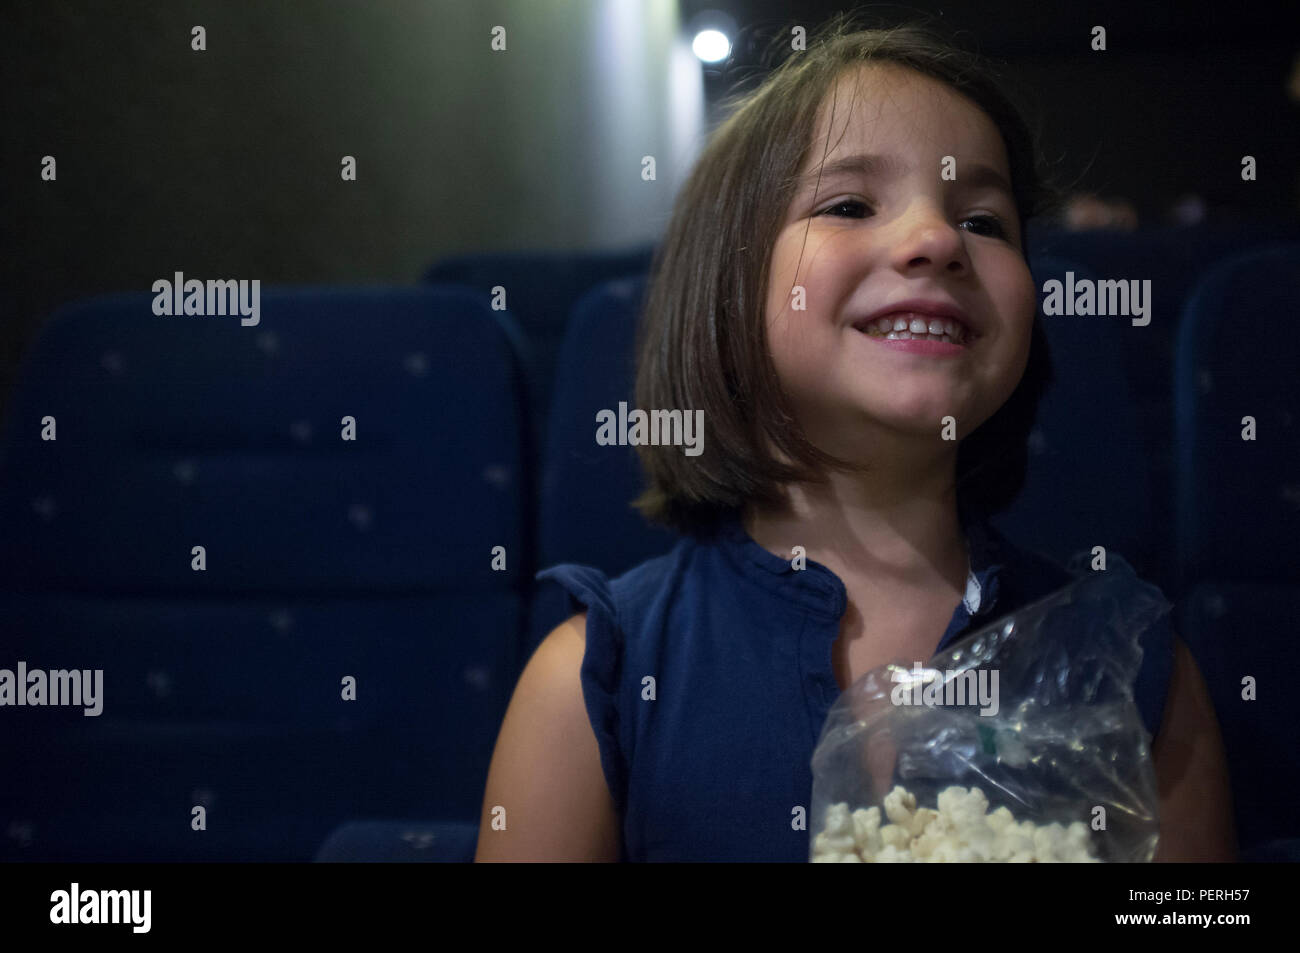 Child girl watching film at real cinema. She is got a happy expression Stock Photo